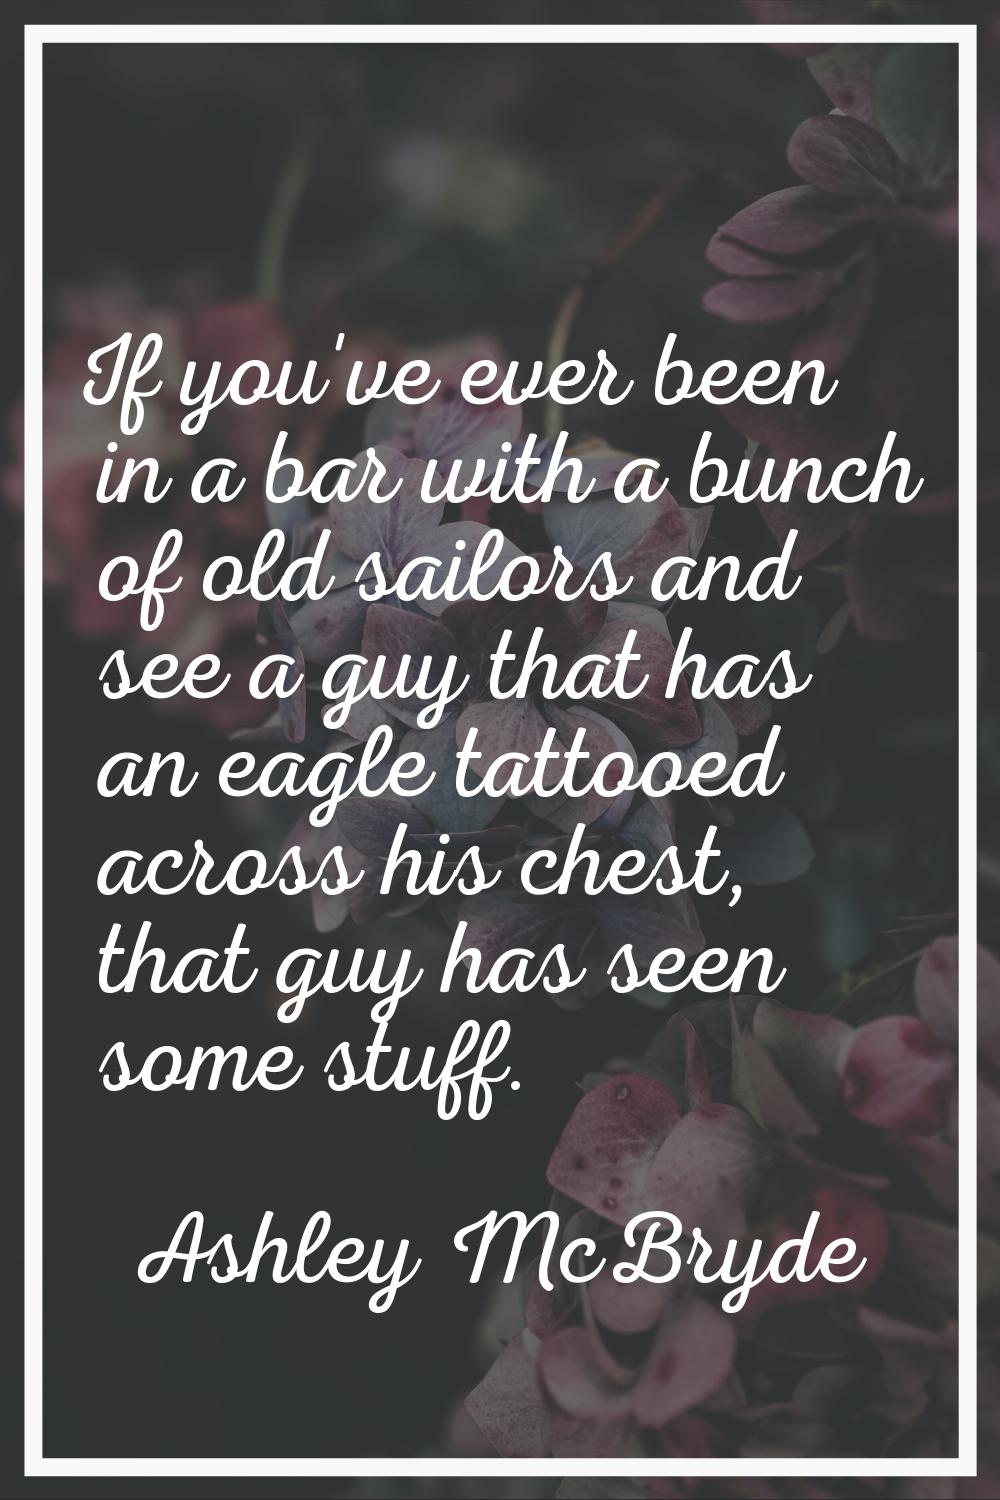 If you've ever been in a bar with a bunch of old sailors and see a guy that has an eagle tattooed a